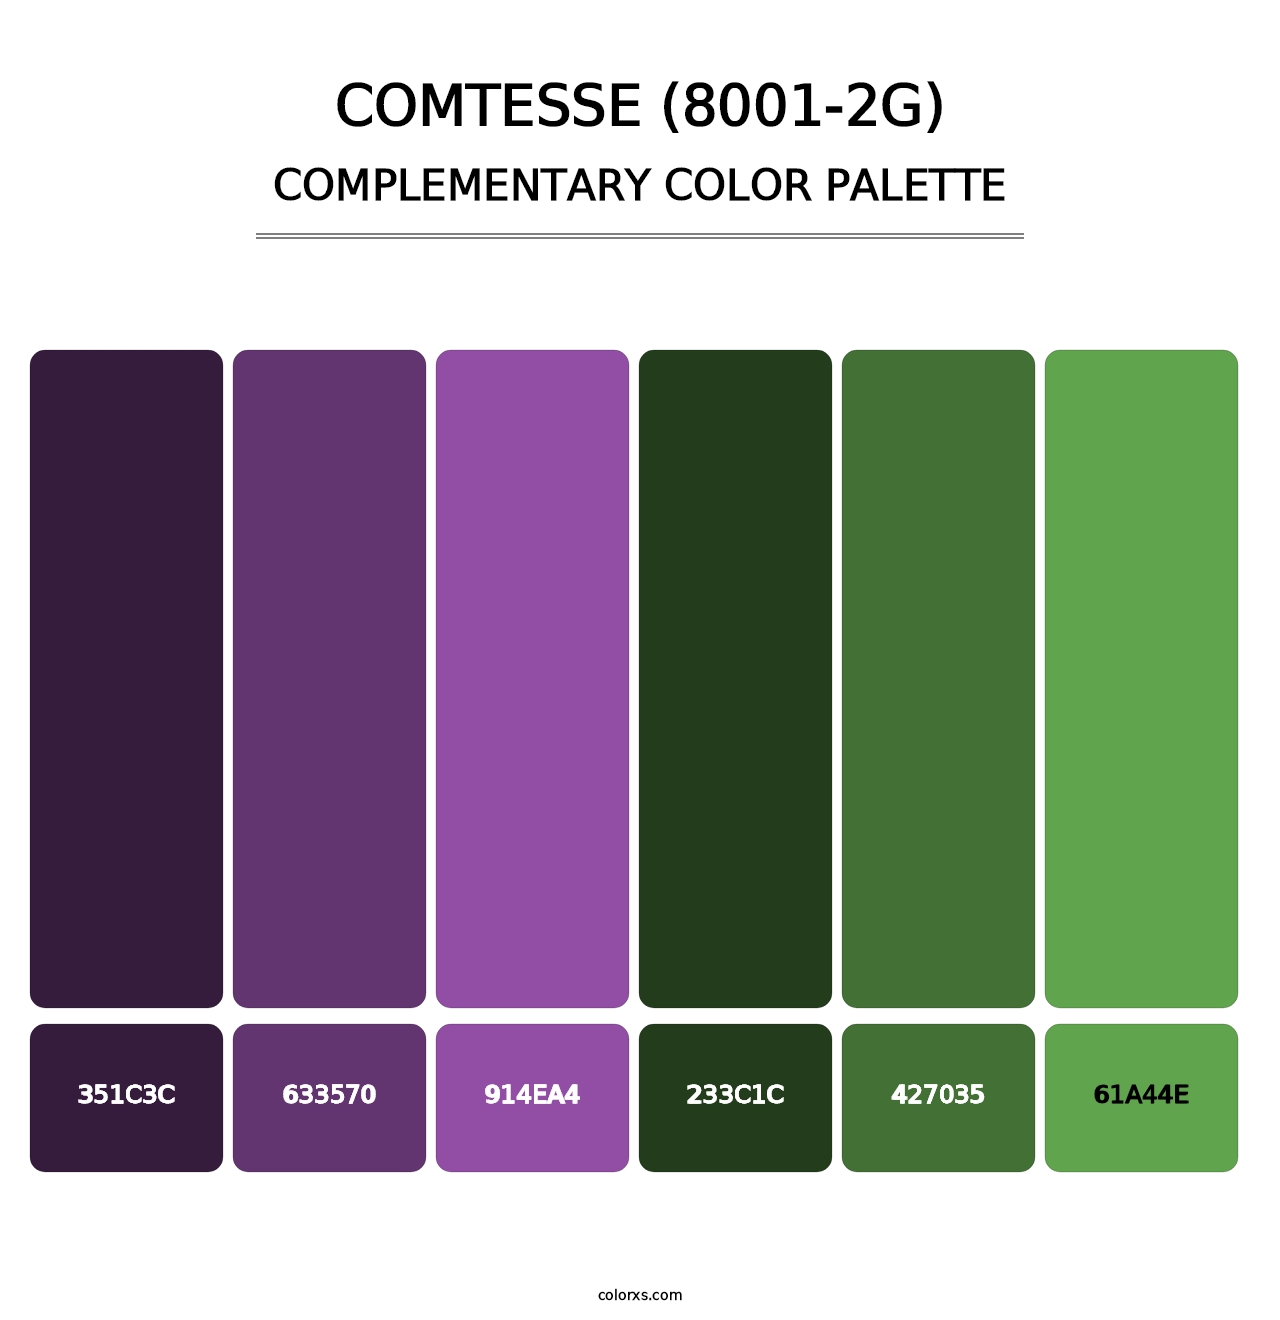 Comtesse (8001-2G) - Complementary Color Palette